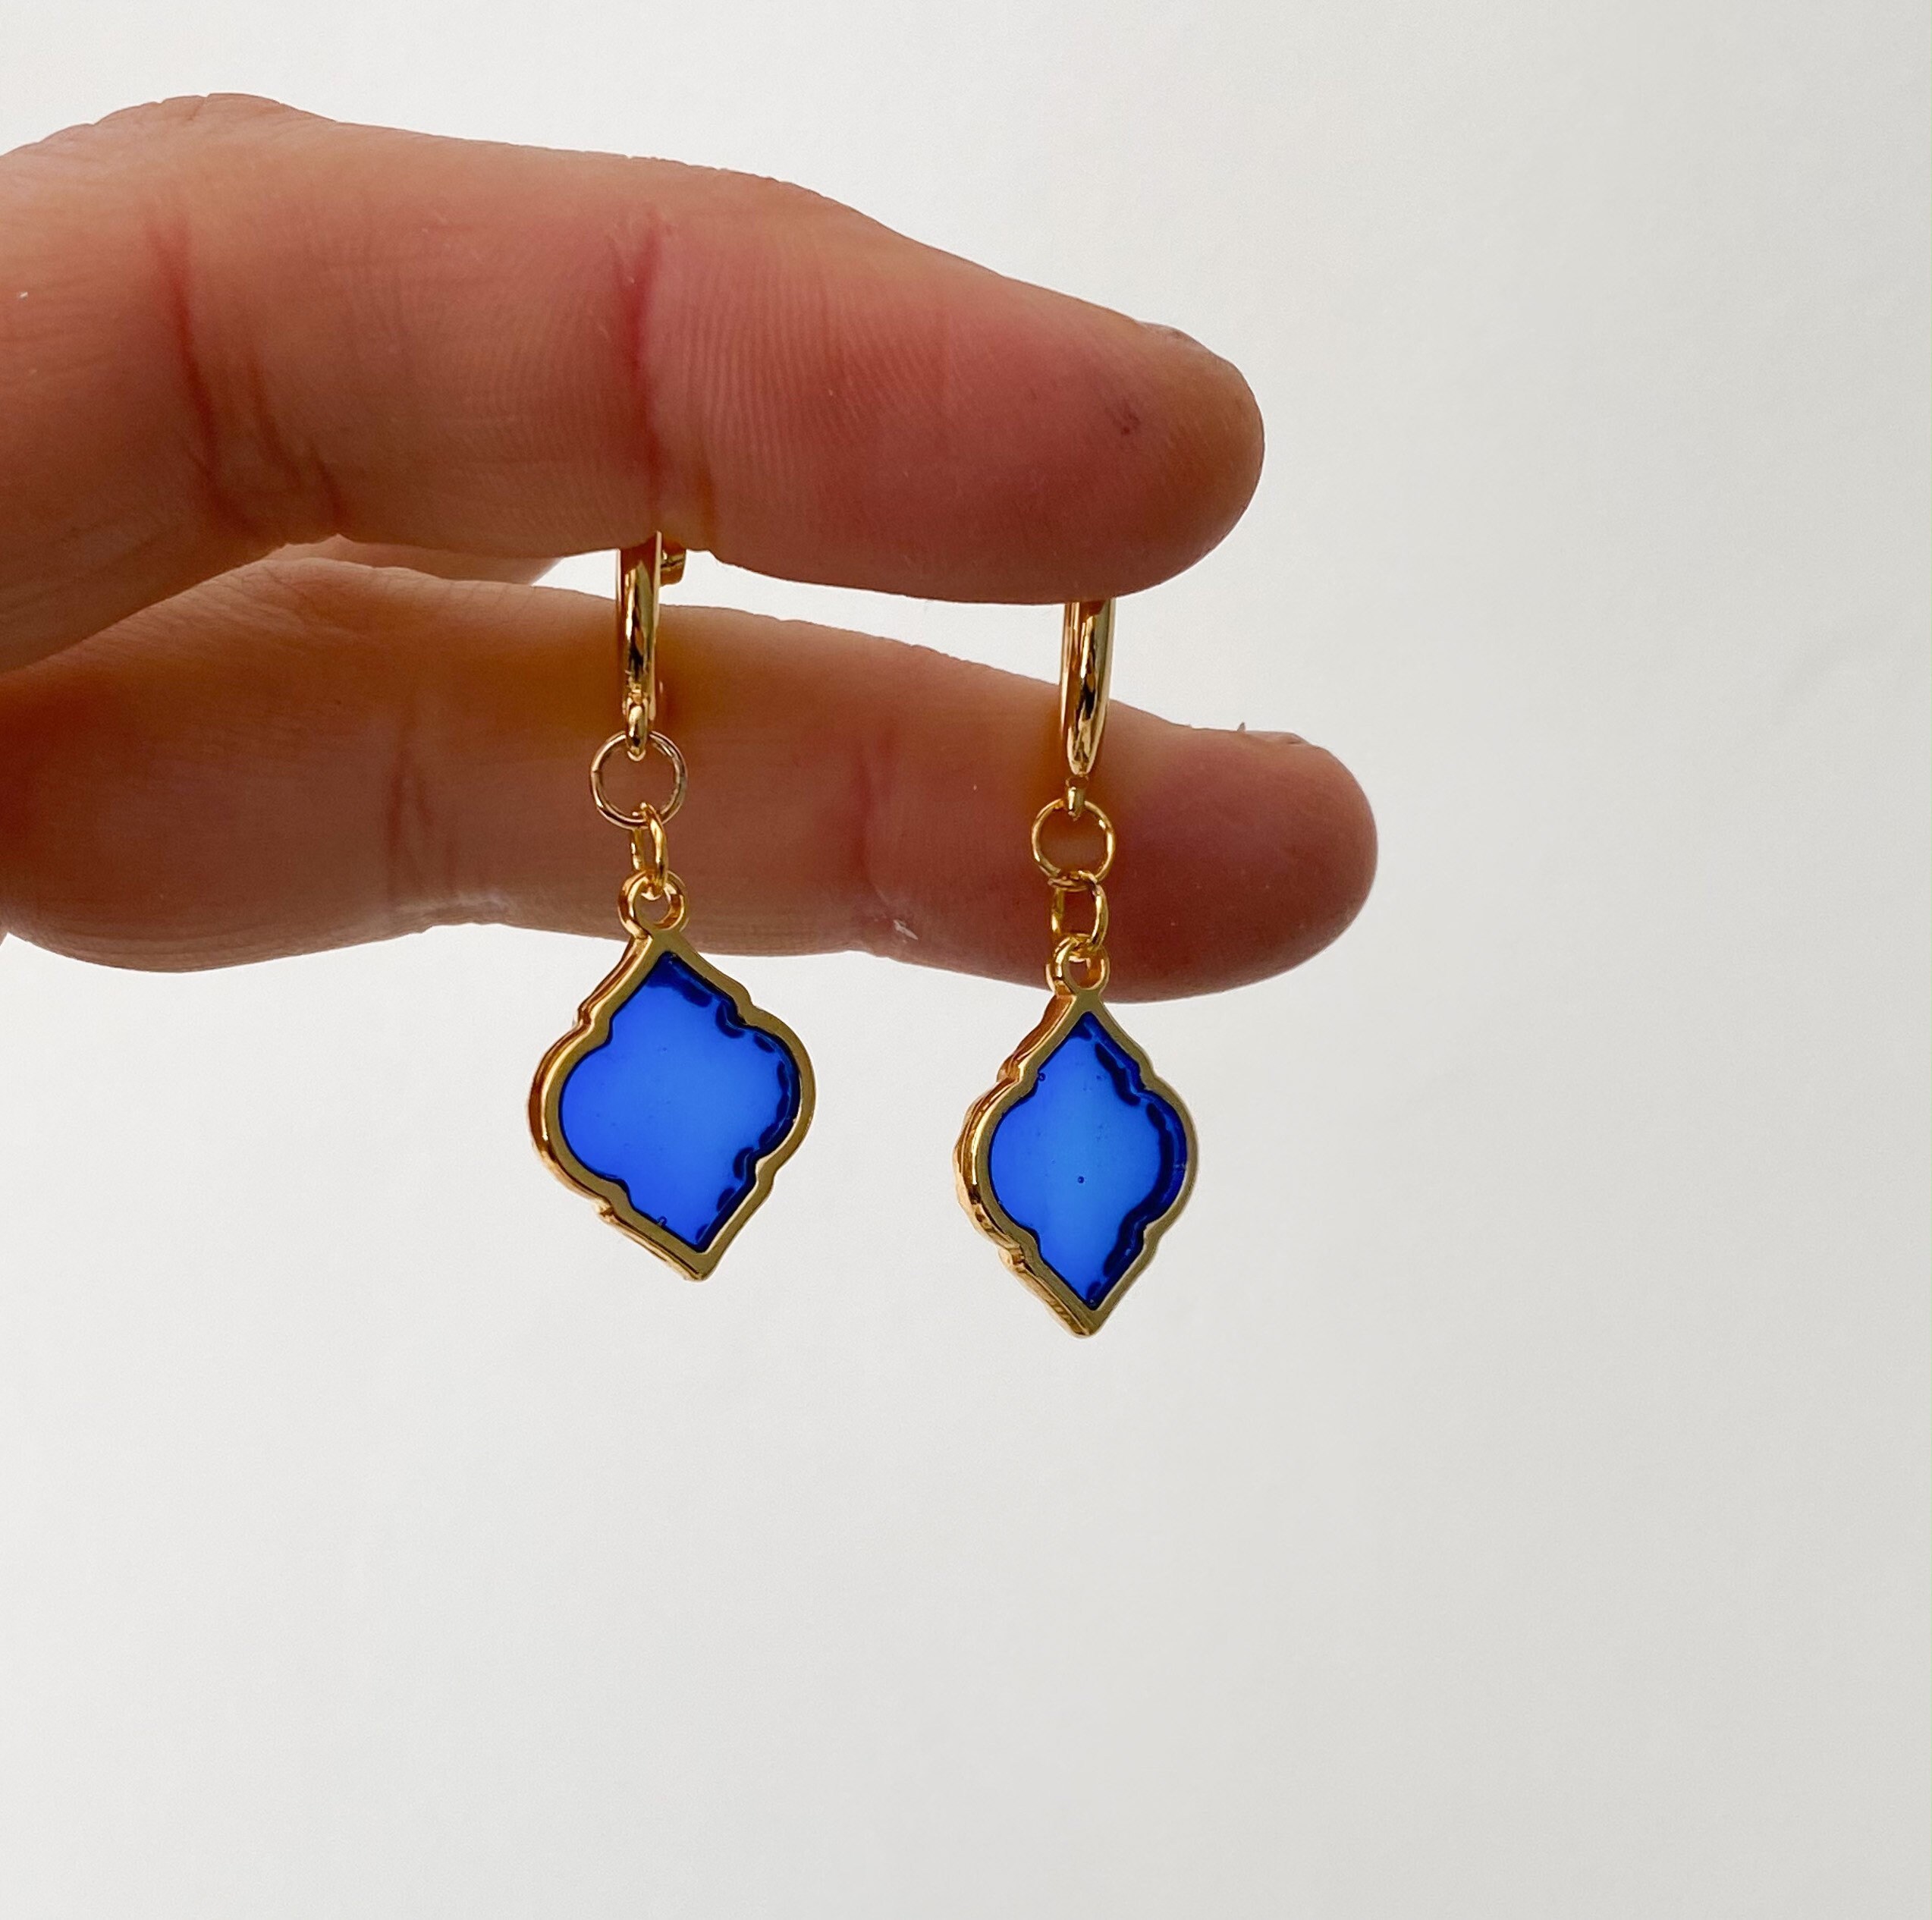 Blue glass earring with gold colored metal accents and hook